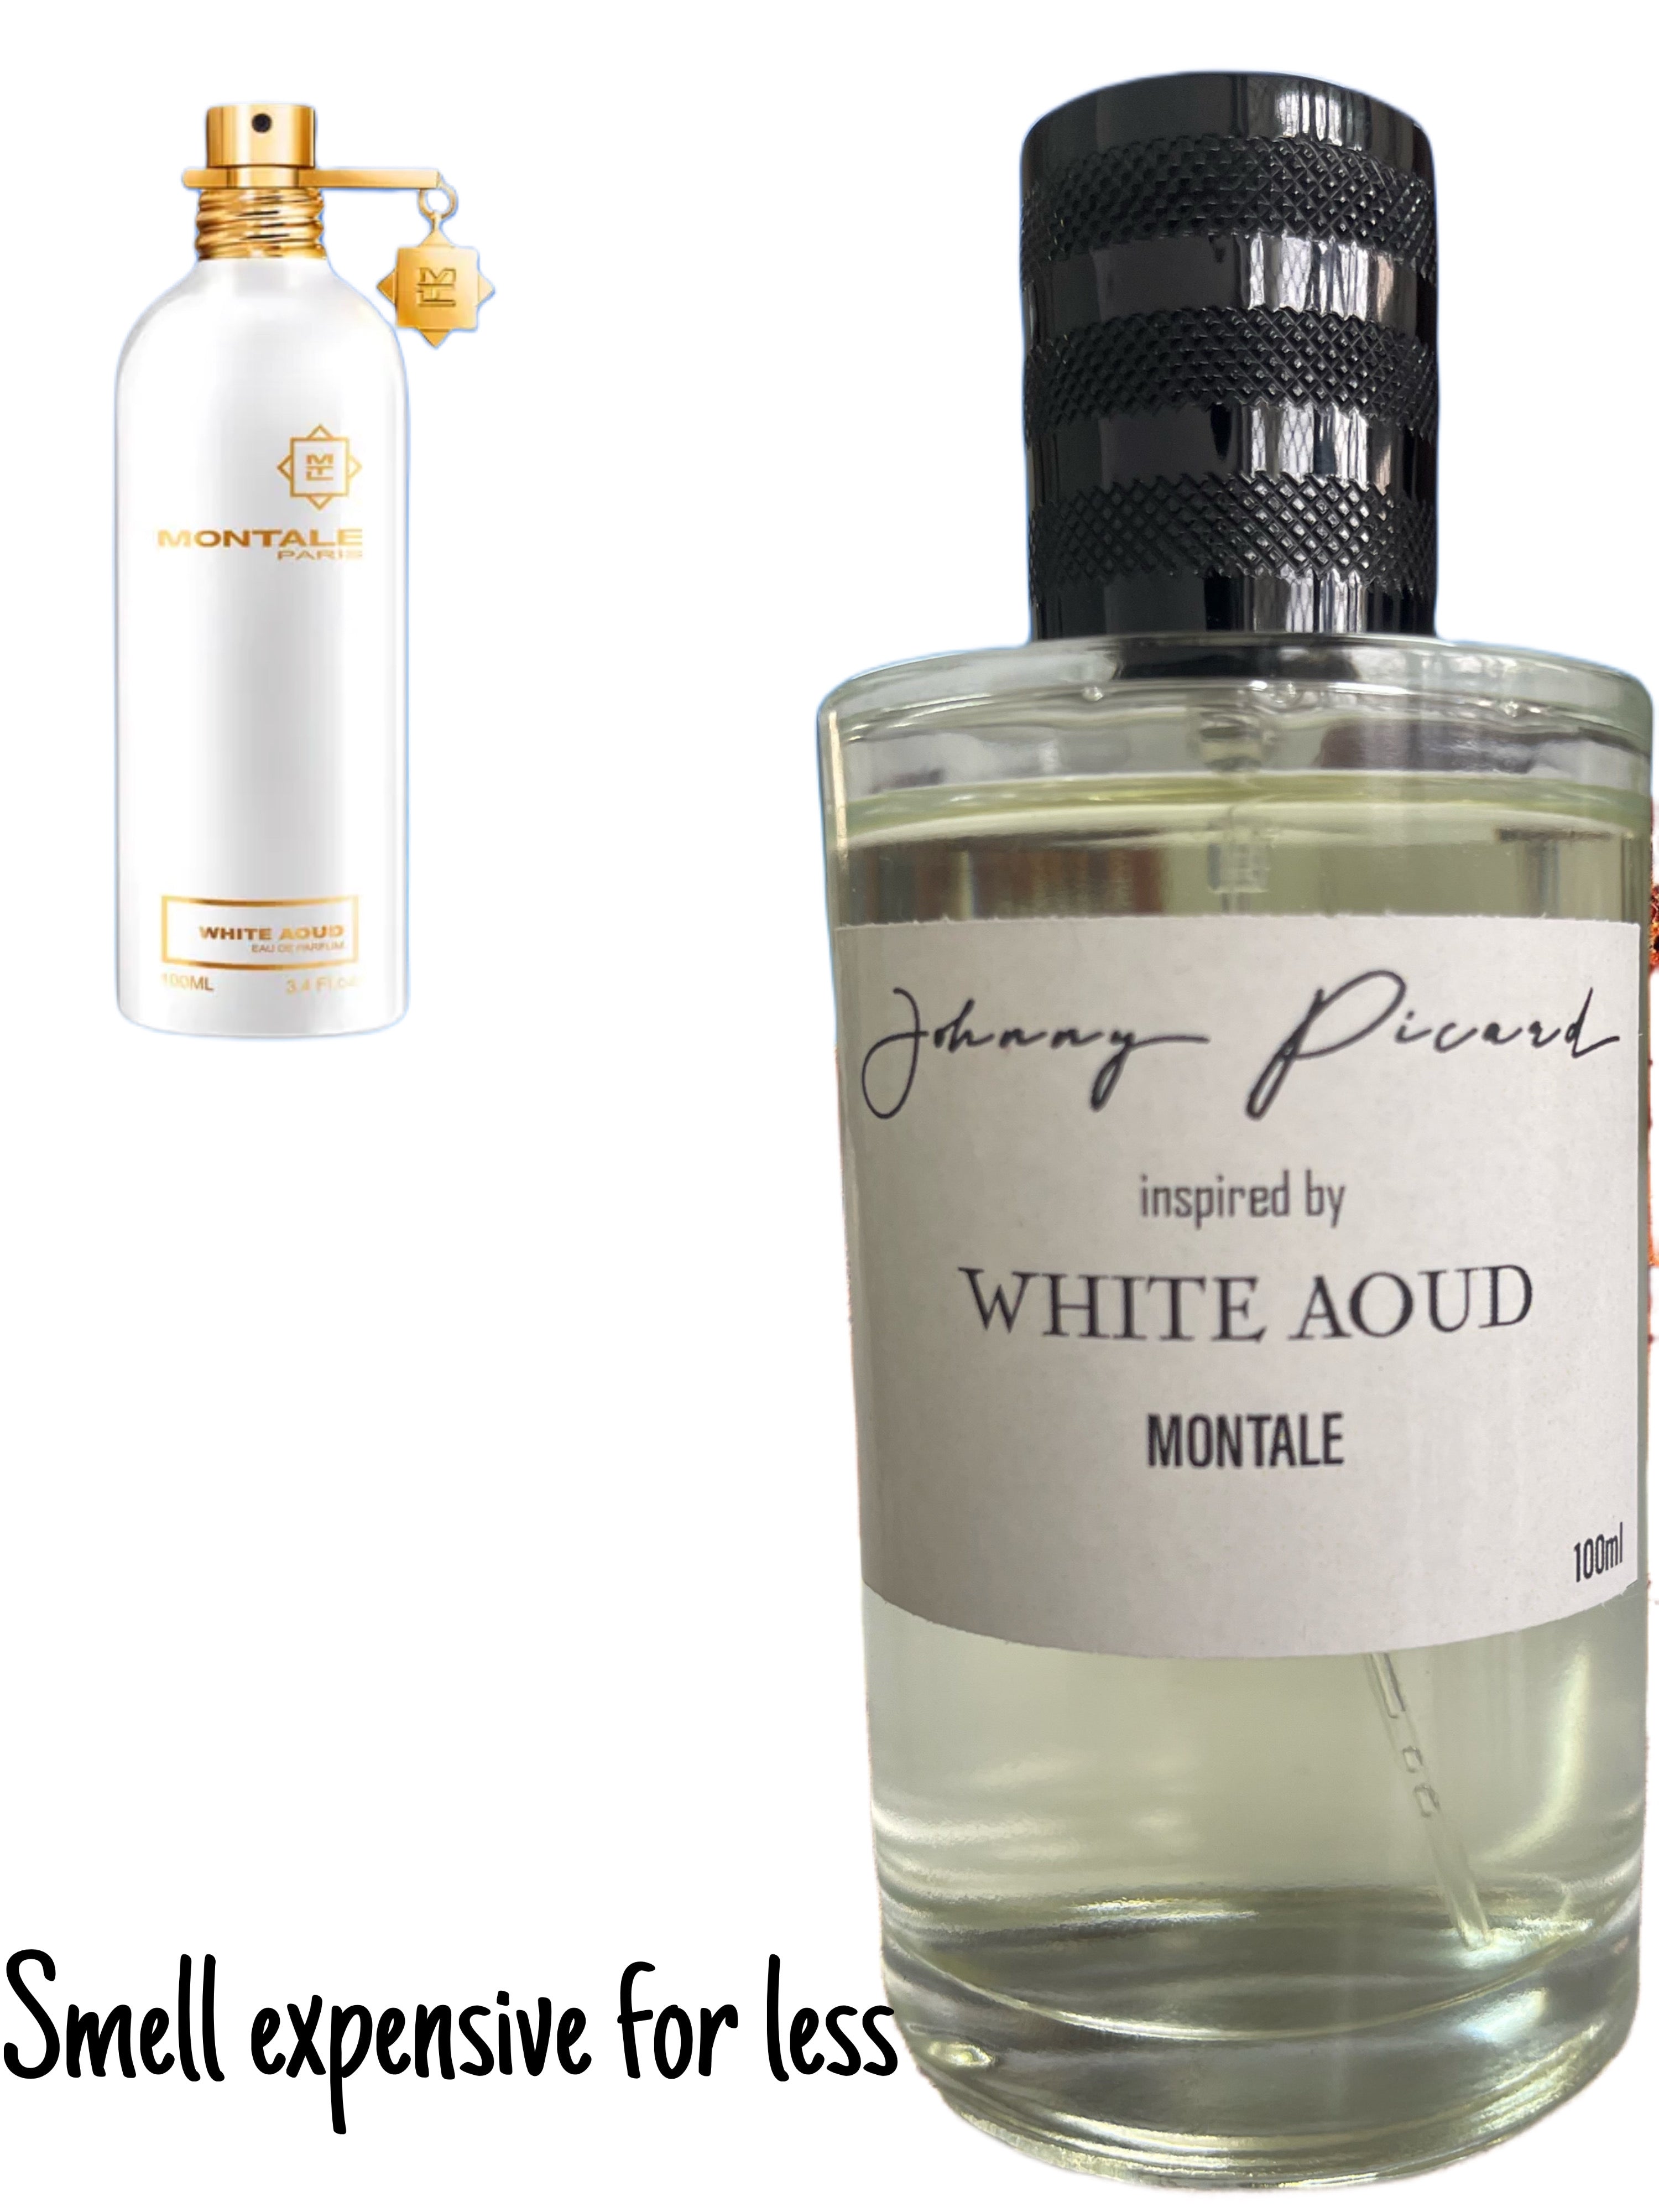 Johnny Picard Inspired By White aoud MONTALE